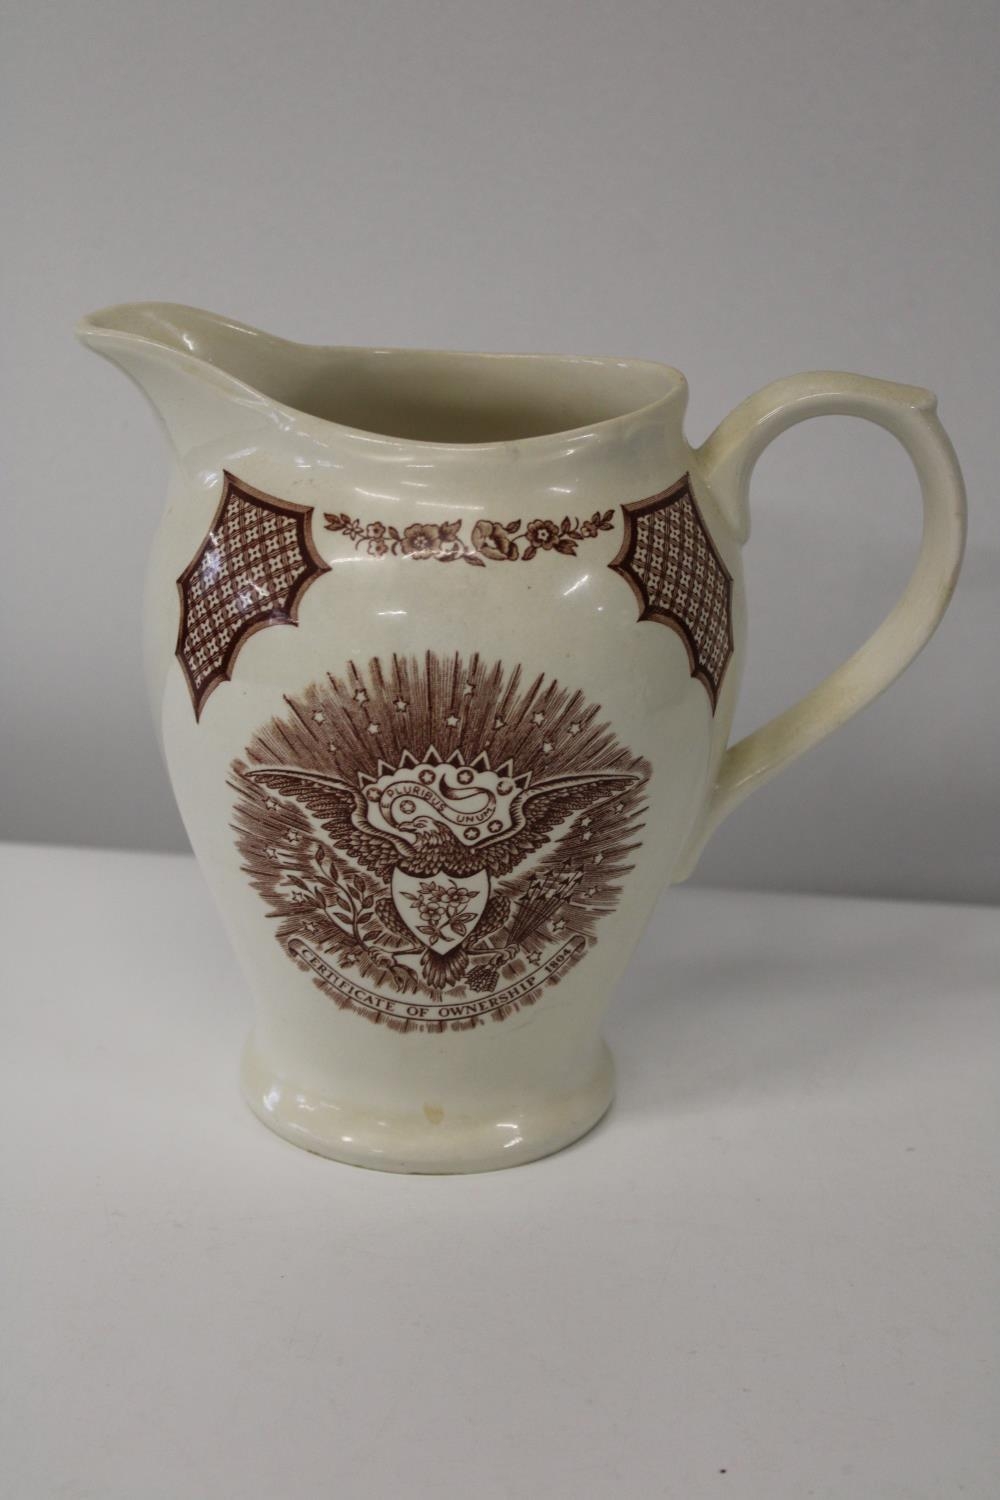 A collectable Alfred Meakins jug